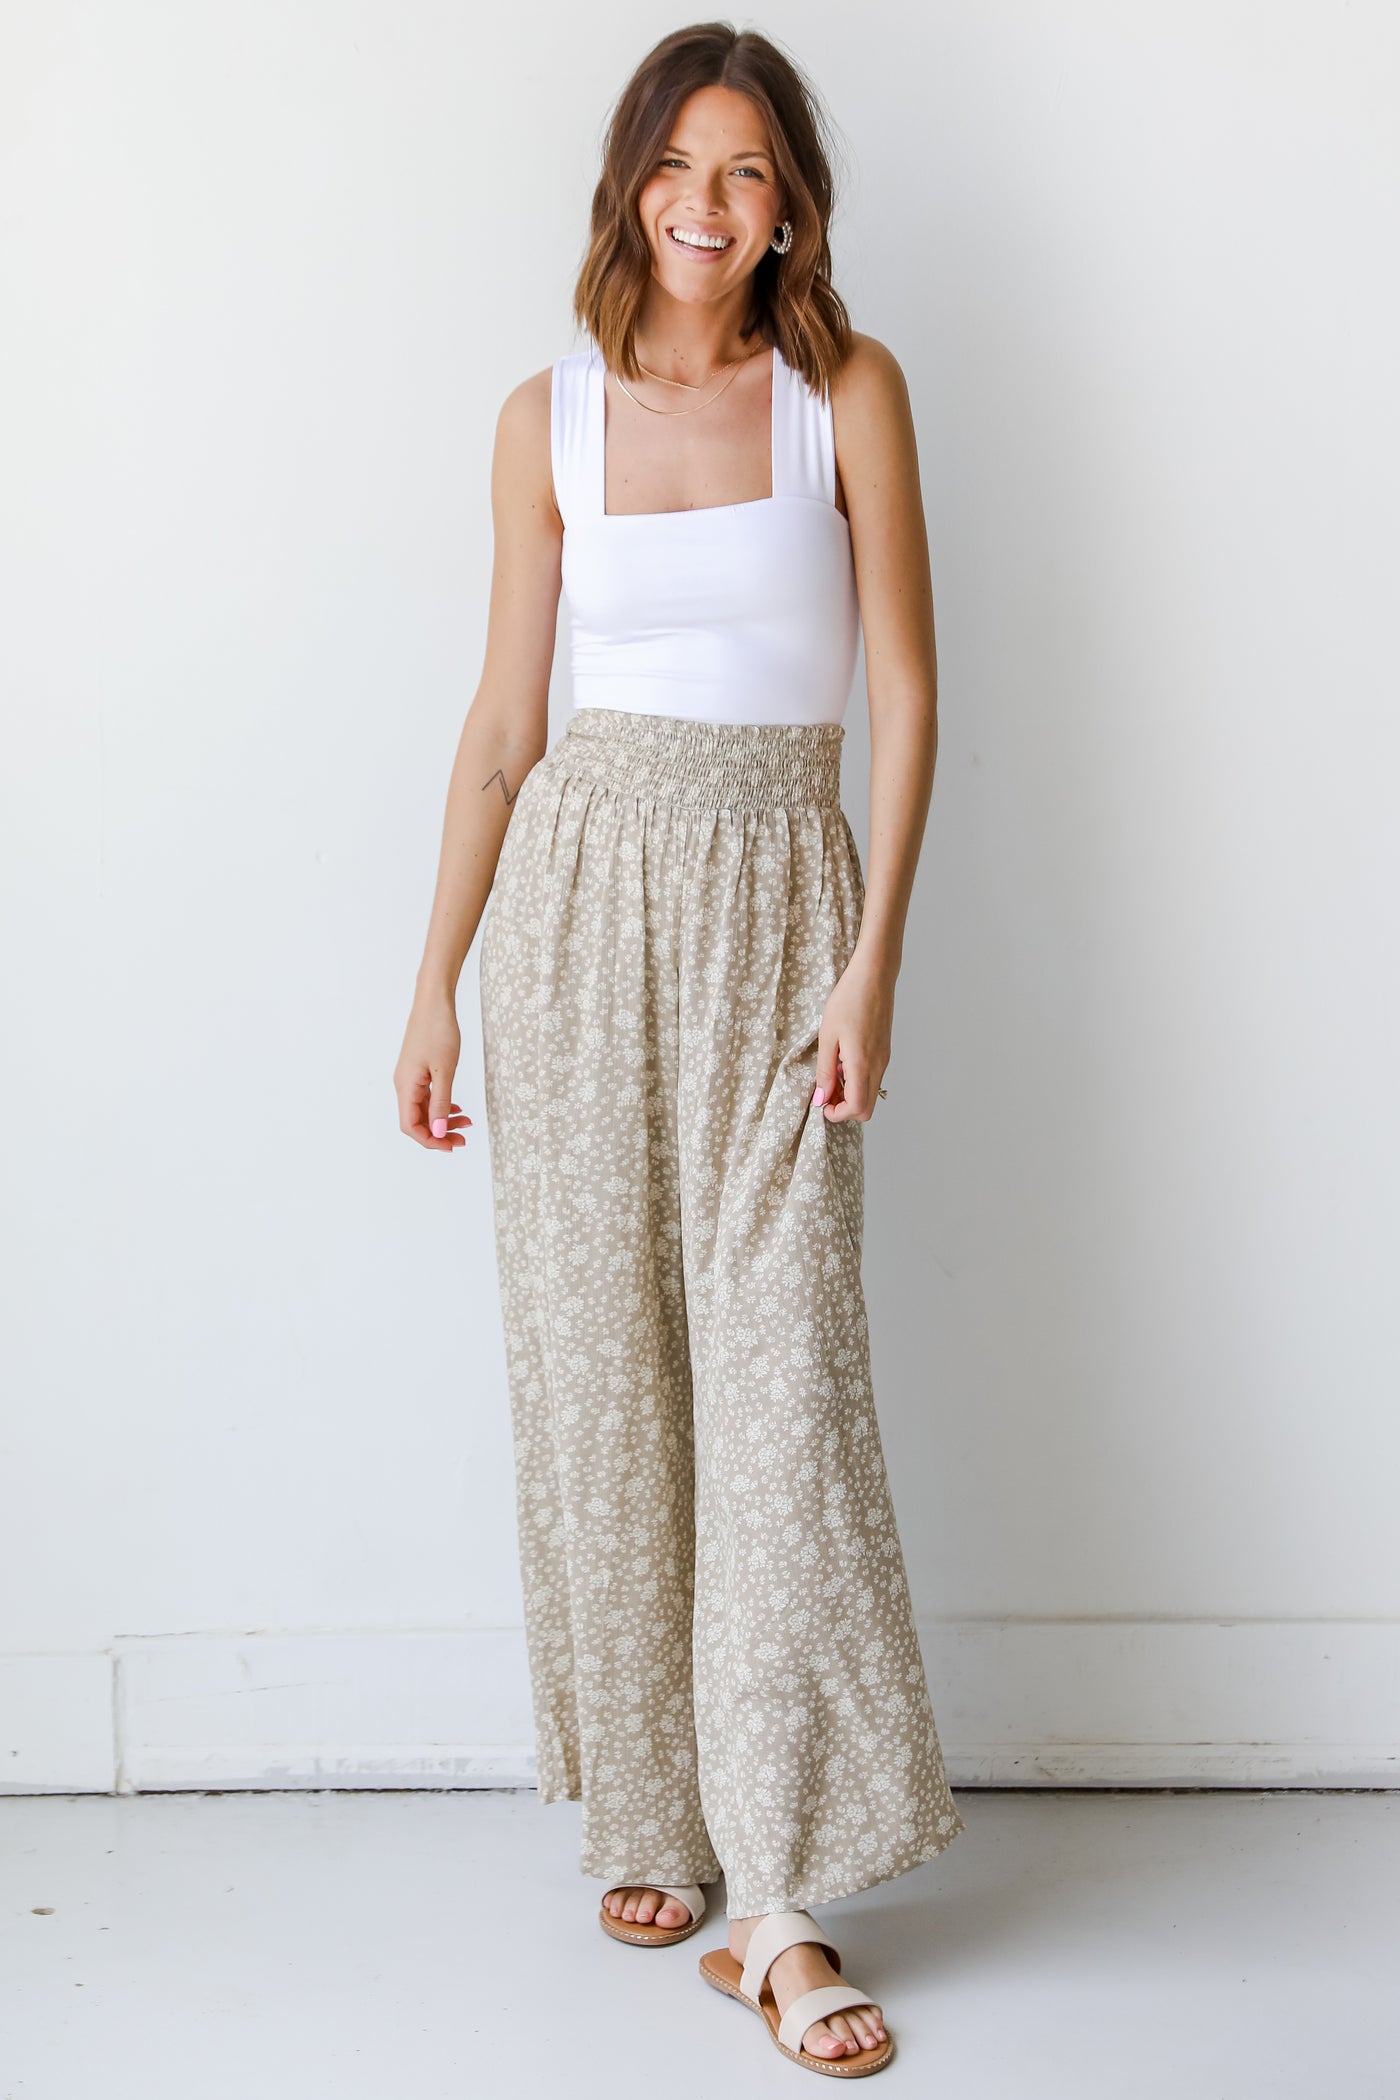 Floral Wide Leg Pants in taupe from dress up